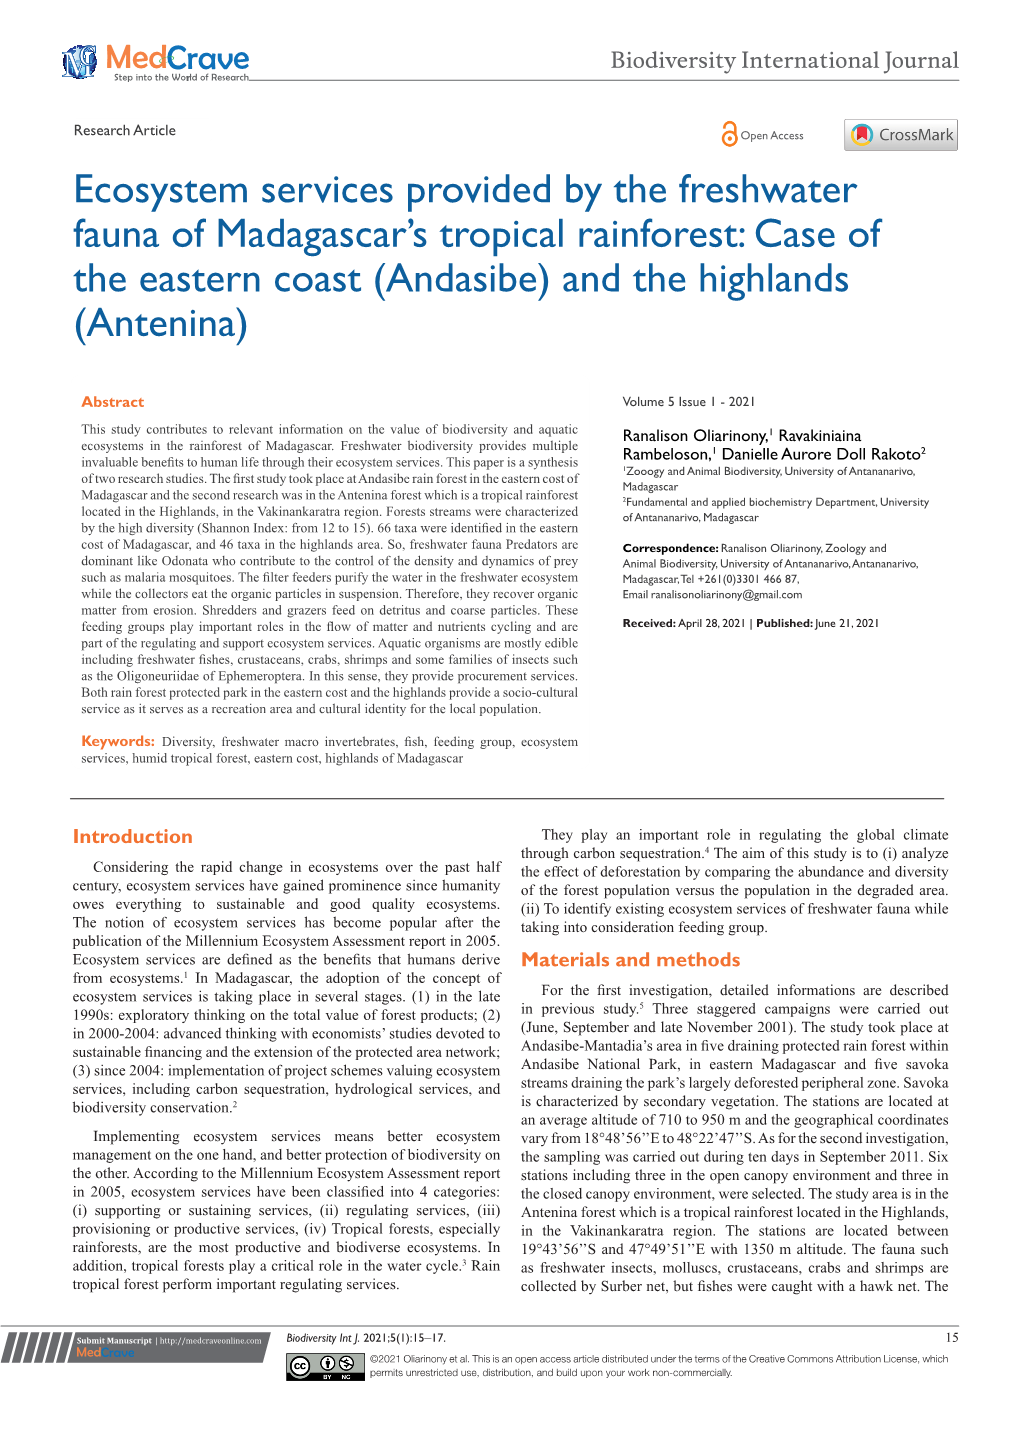 Ecosystem Services Provided by the Freshwater Fauna of Madagascar's